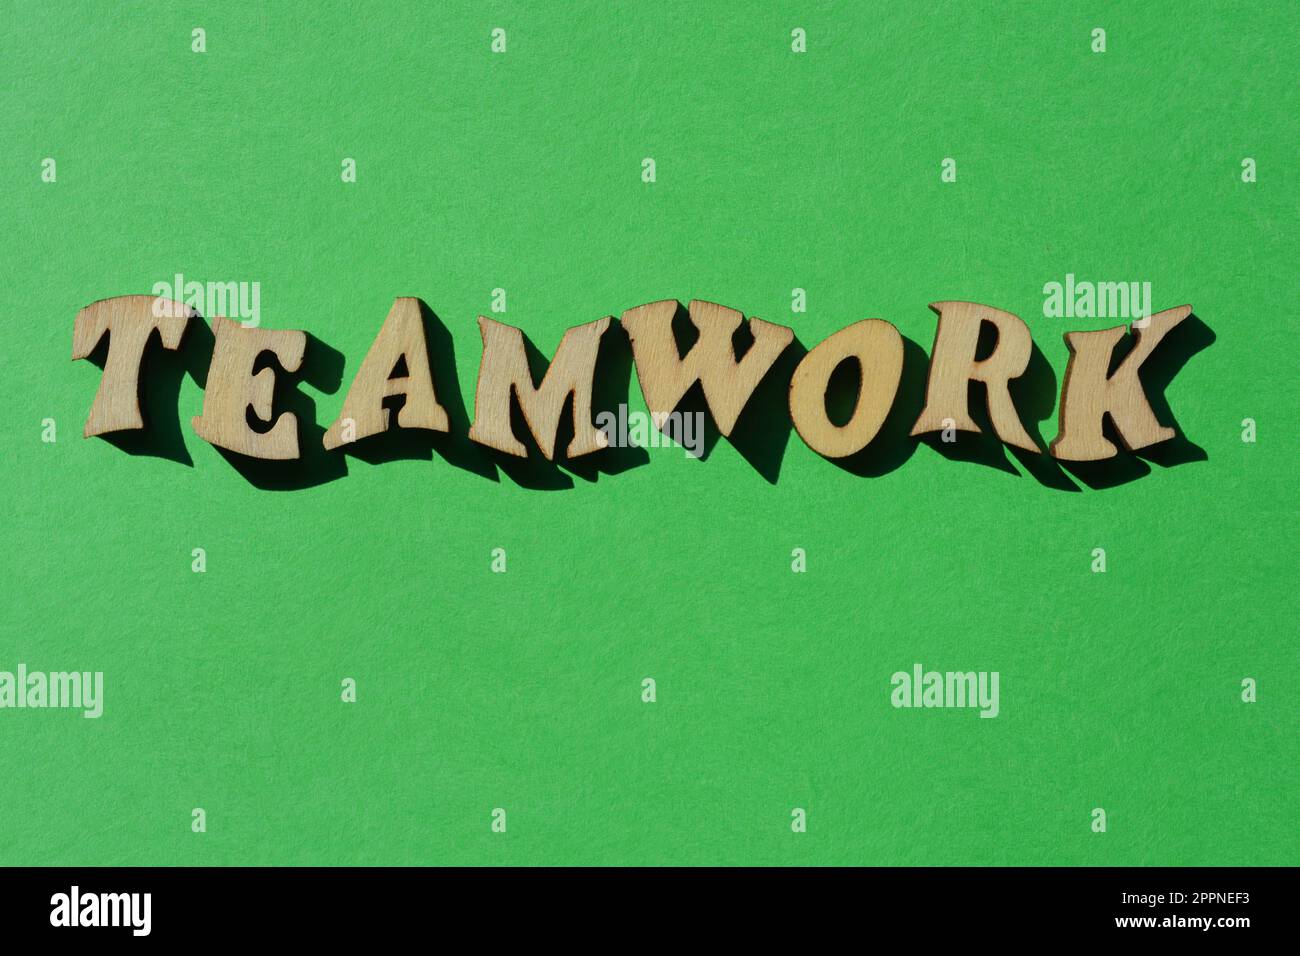 Teamwork, word in wooden alphabet letters isolated on bright green background Stock Photo